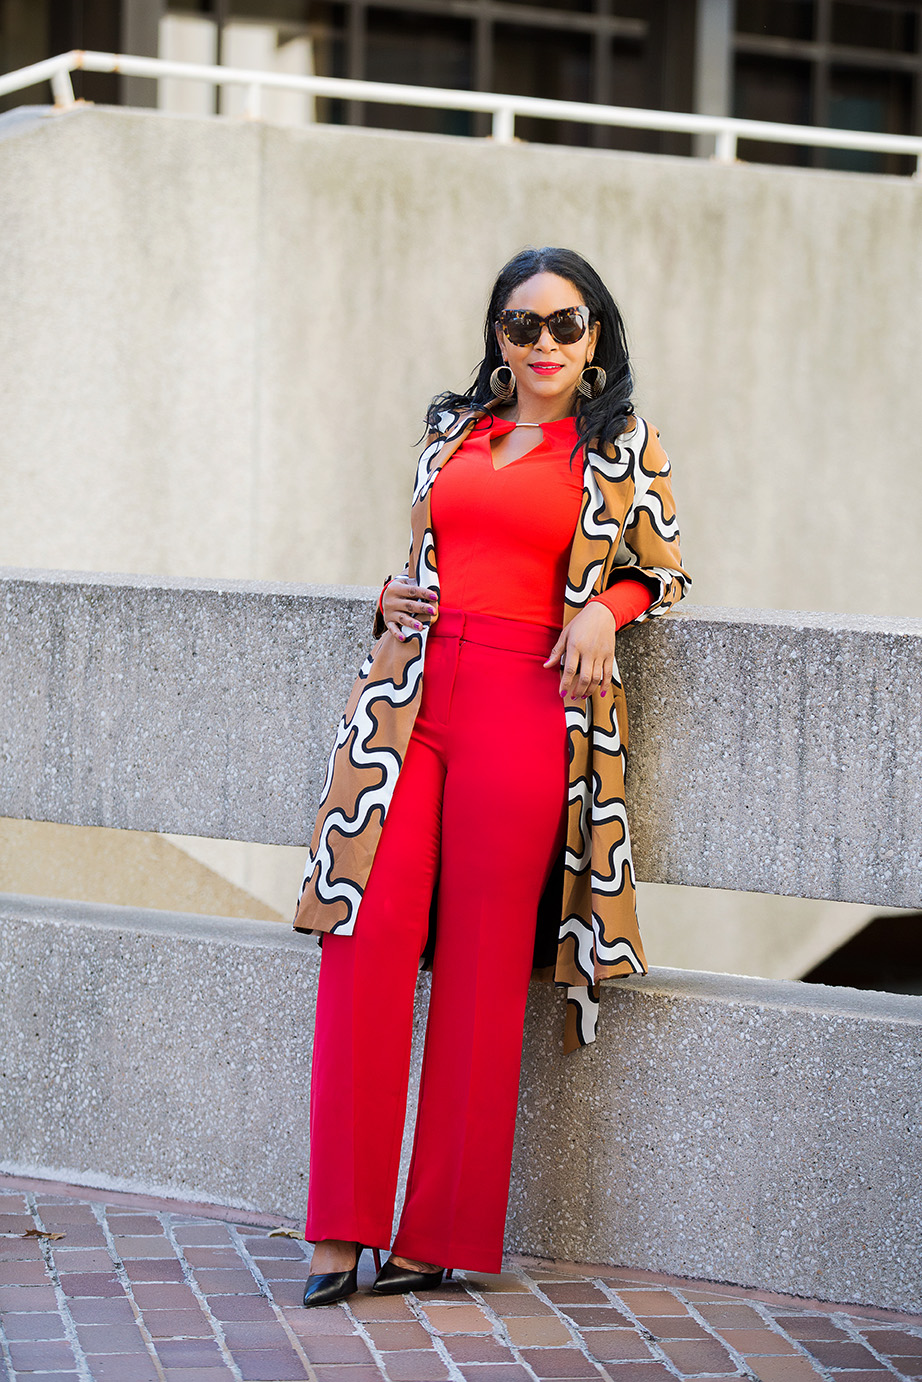 Four Ways to Tackle Mondays Like a Boss / What I'm Wearing: DvF Squiggle Print Trench coat, orange H&M Bodysuit, red H&M Suit Pants, Christian Louboutin Pigalle Pumps